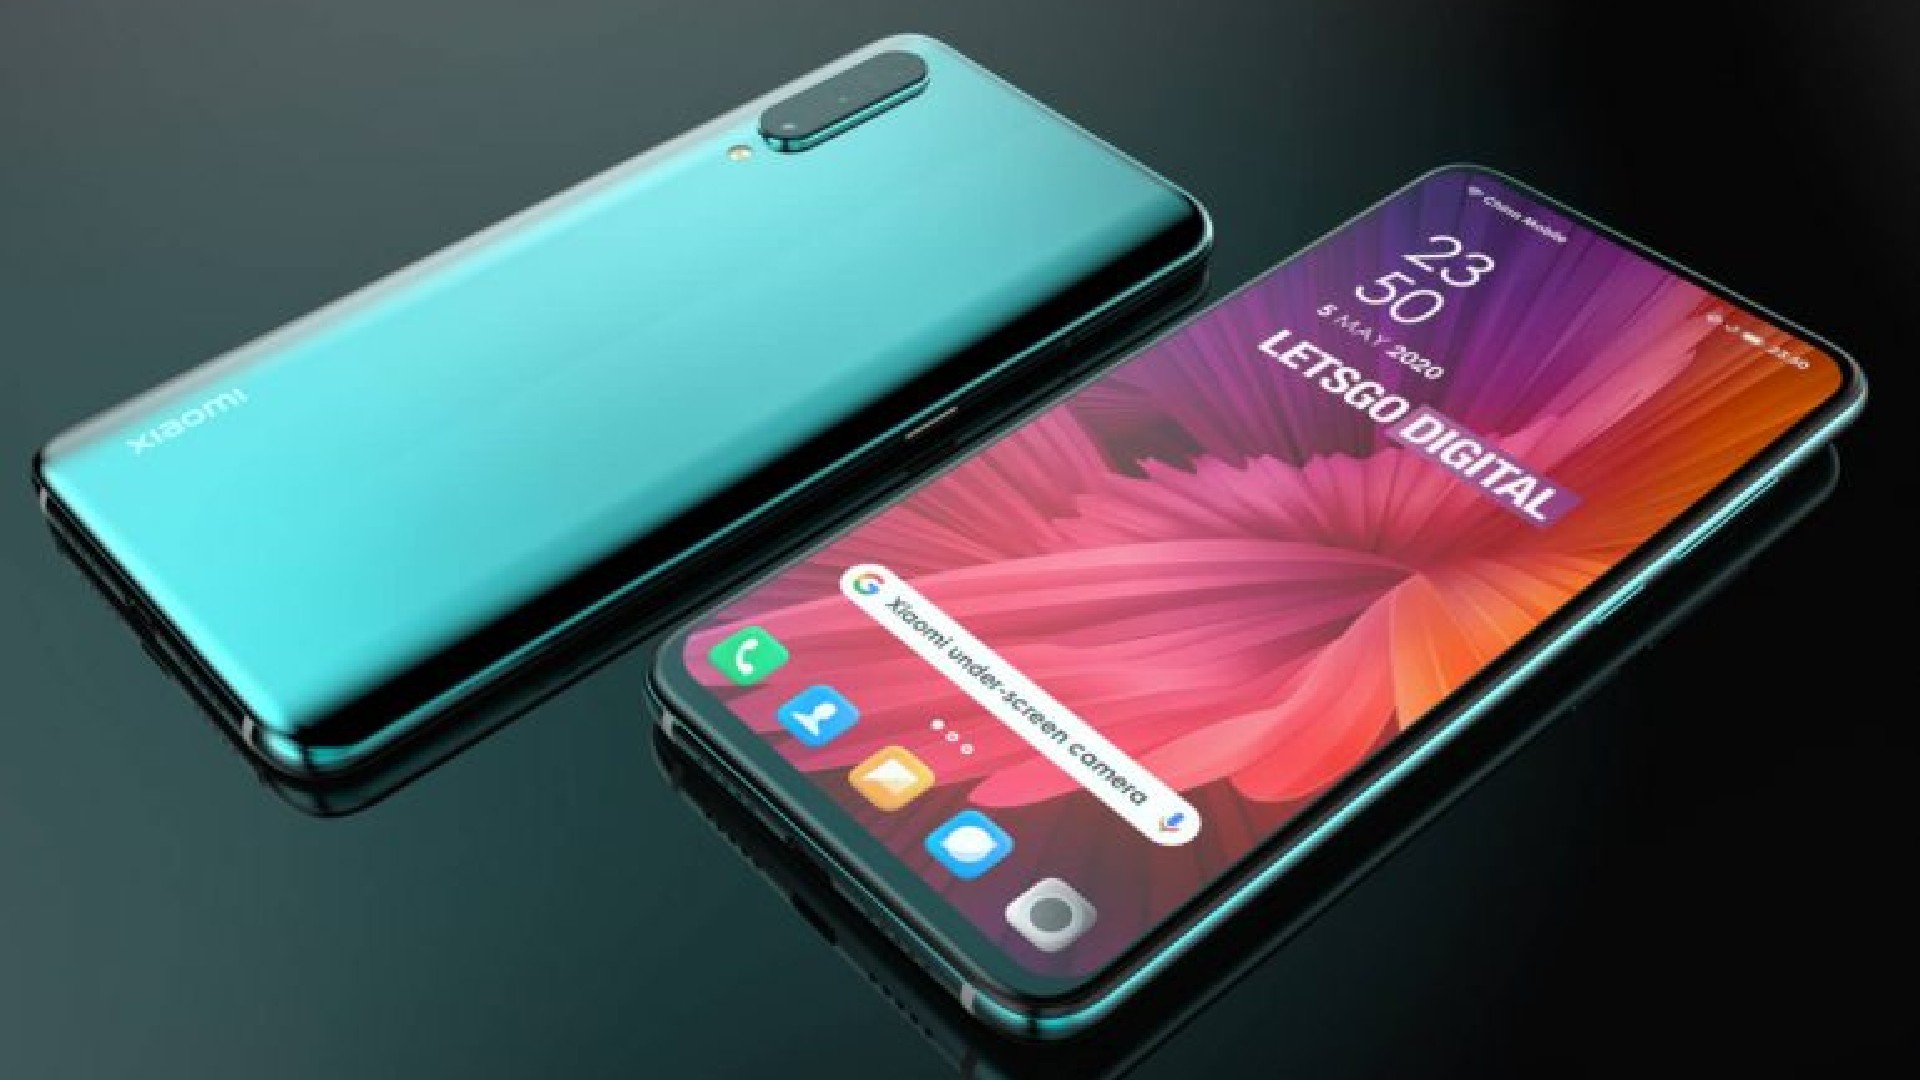 Xiaomi under screen camera phone concept based on patent